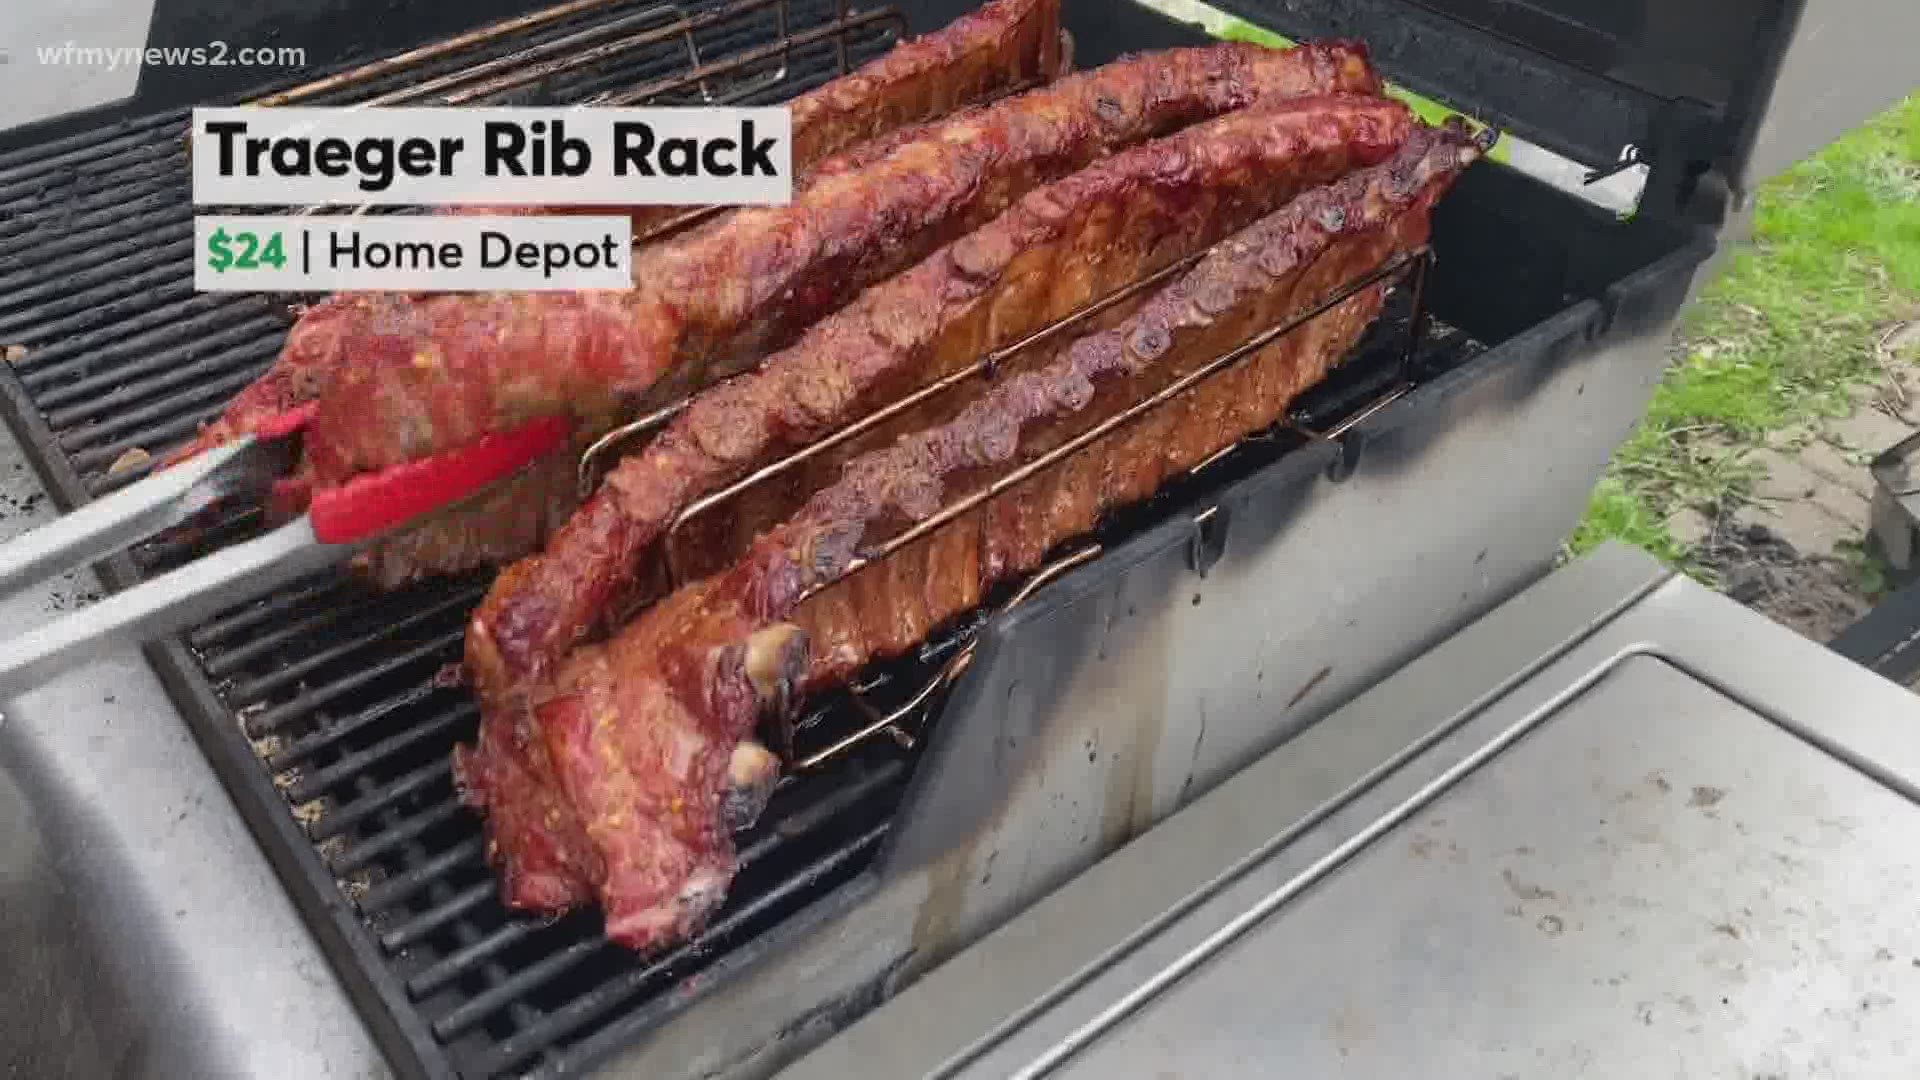 Consumer Reports tests products and grills to find you the best buys out there.